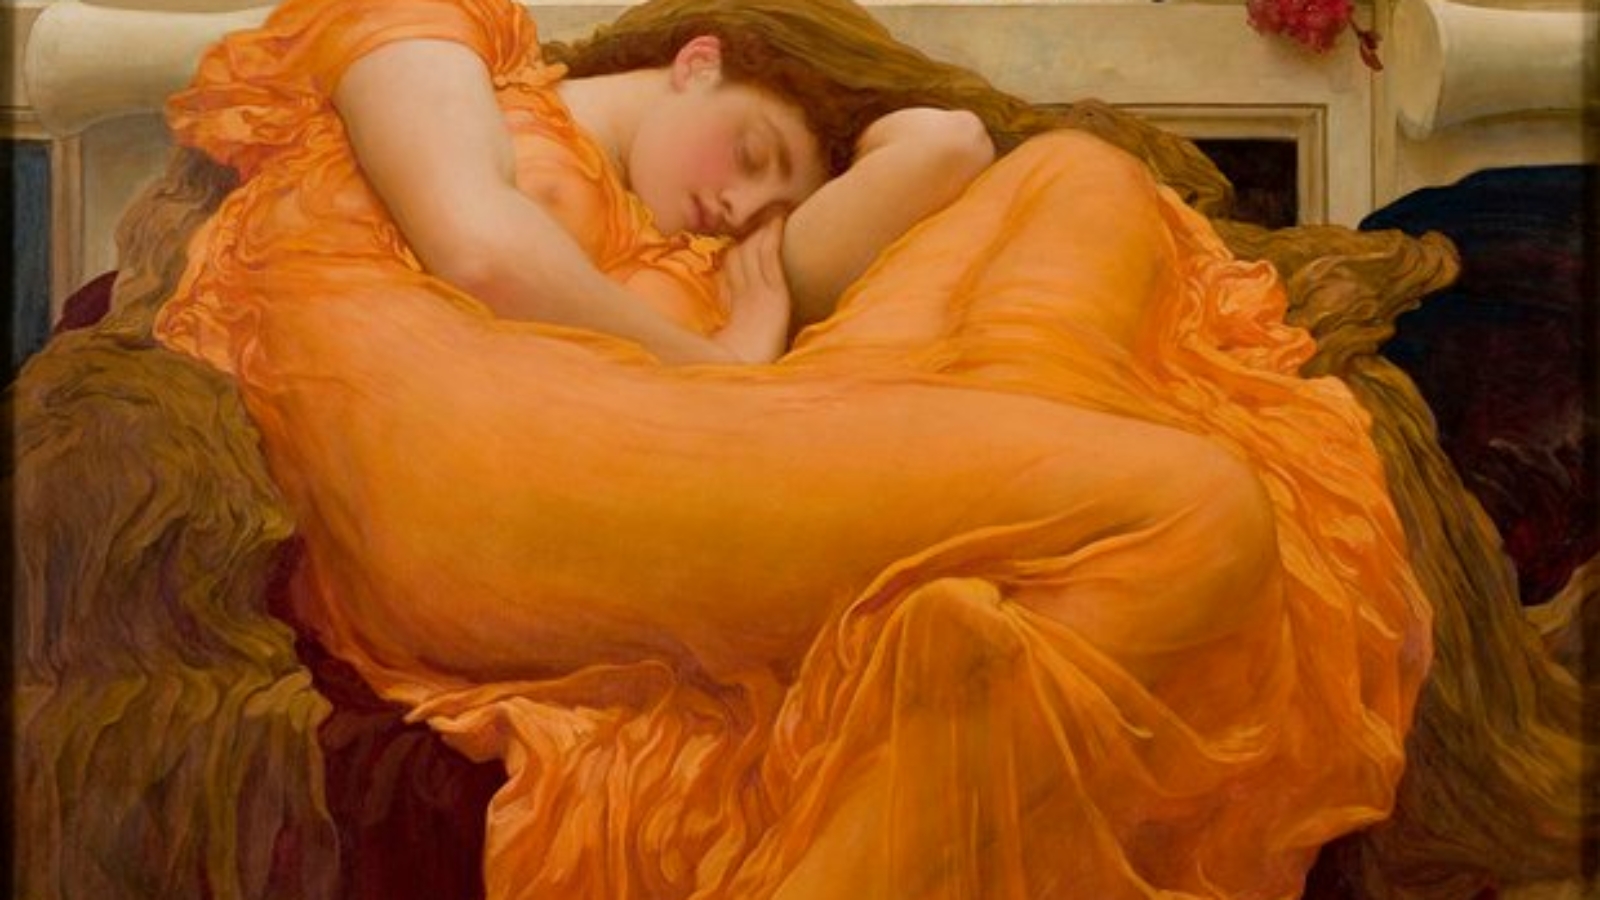 Flaming June
Lord Frederic Leighton